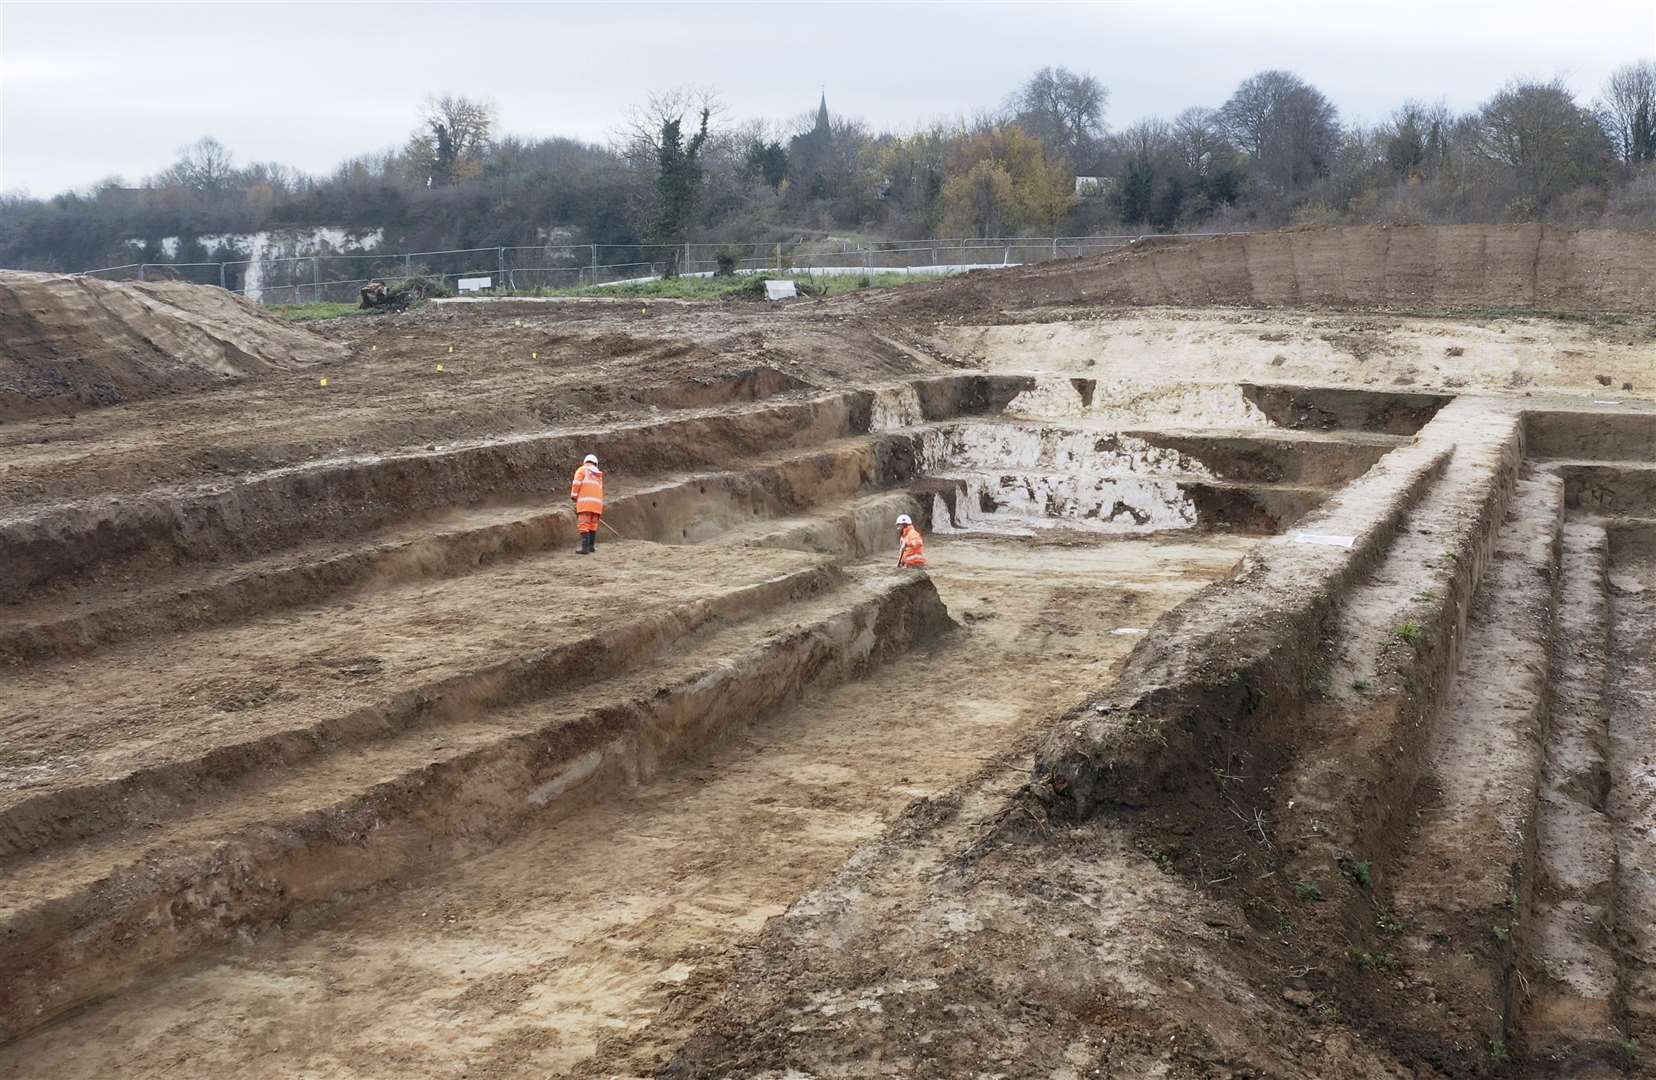 The excavation site in Medway: Archaeology South-East/ UCL